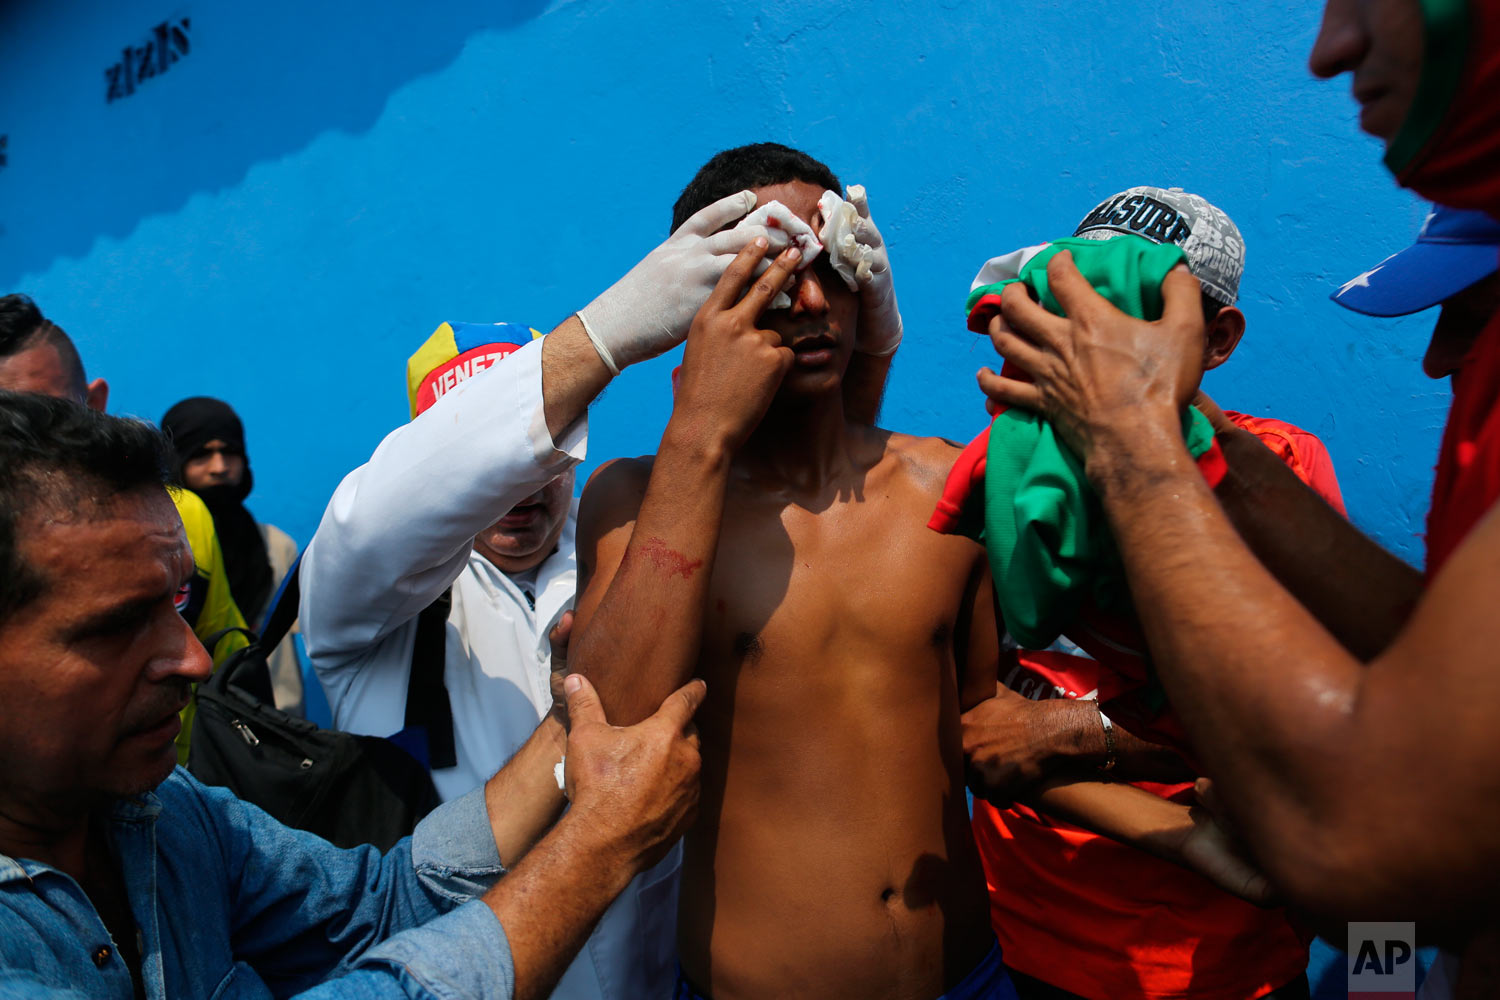  A demonstrator is given first aid after he was injured in the face during clashes with the Venezuelan Bolivarian National Guard in Urena, Venezuela, near the border with Colombia, Saturday, Feb. 23, 2019. (AP Photo/Rodrigo Abd) 